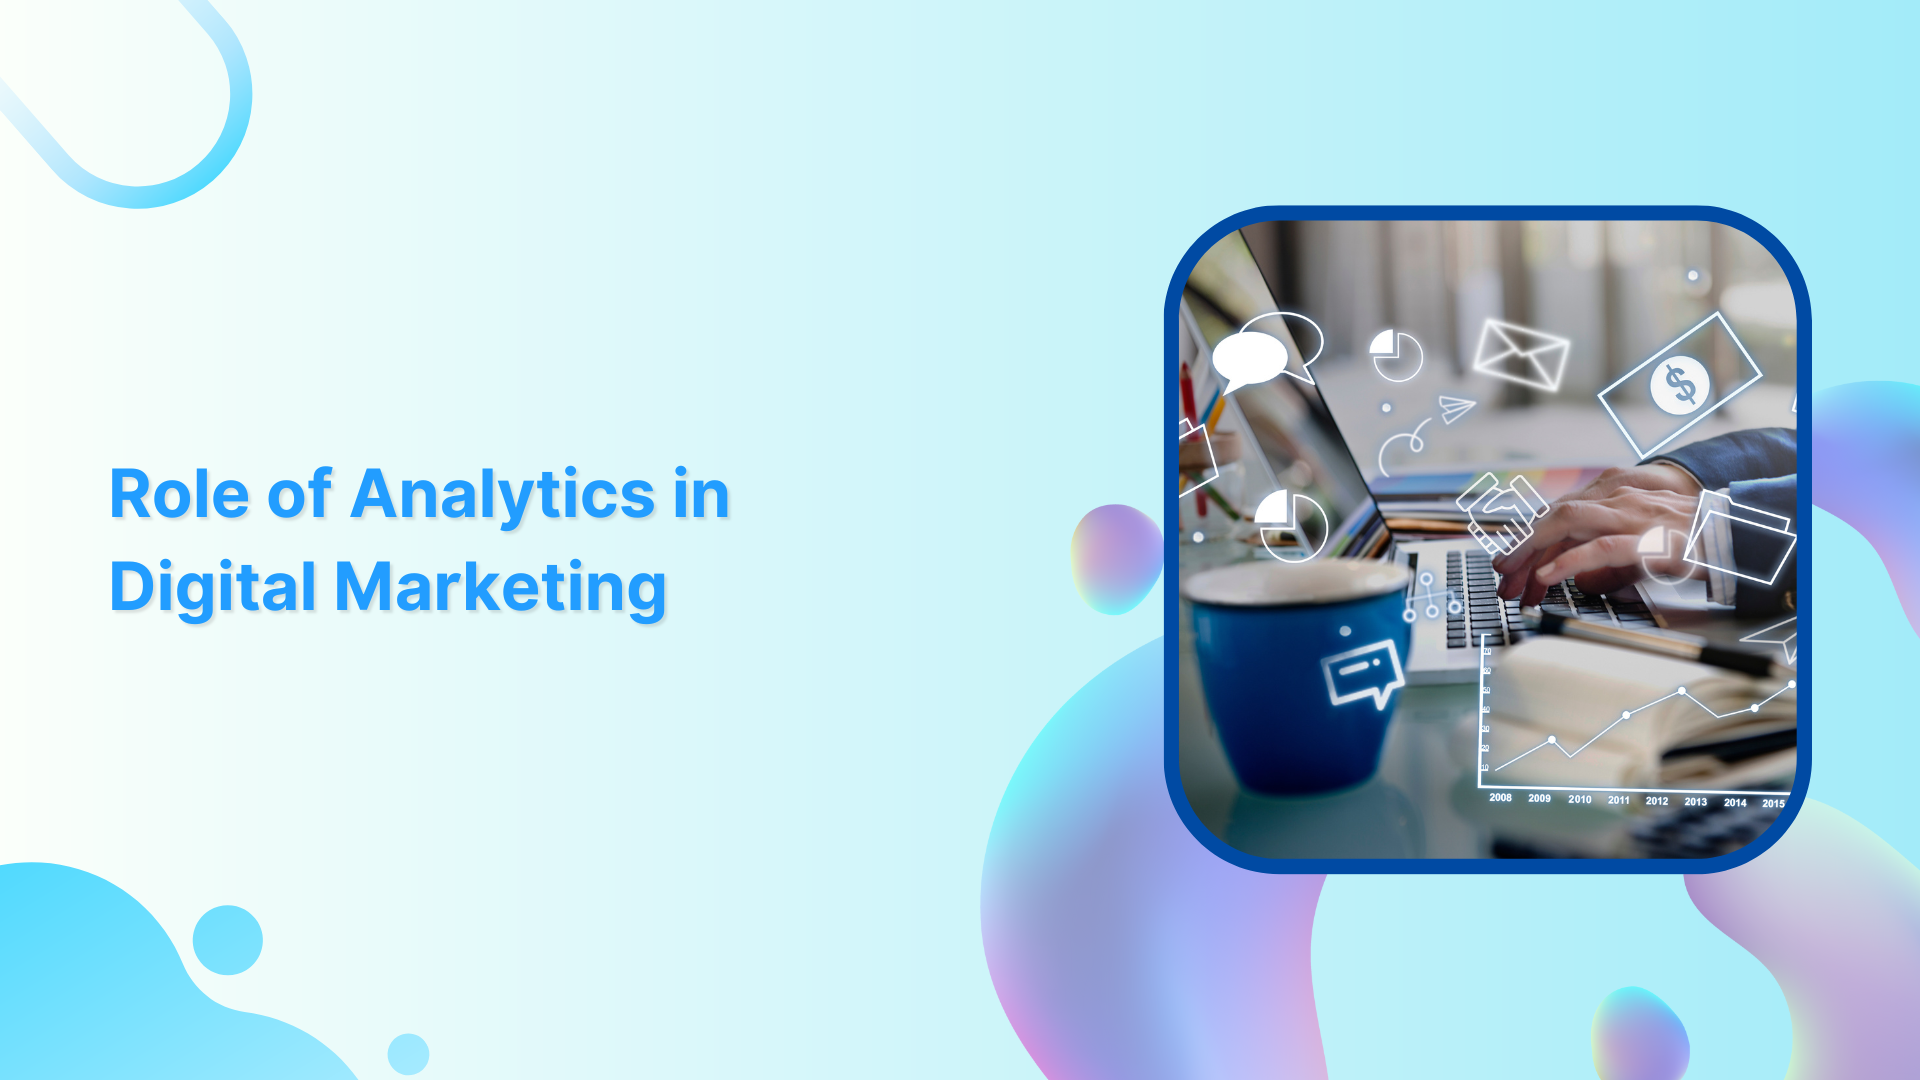 Exploring the Role of Analytics in Digital Marketing to Increase ROI